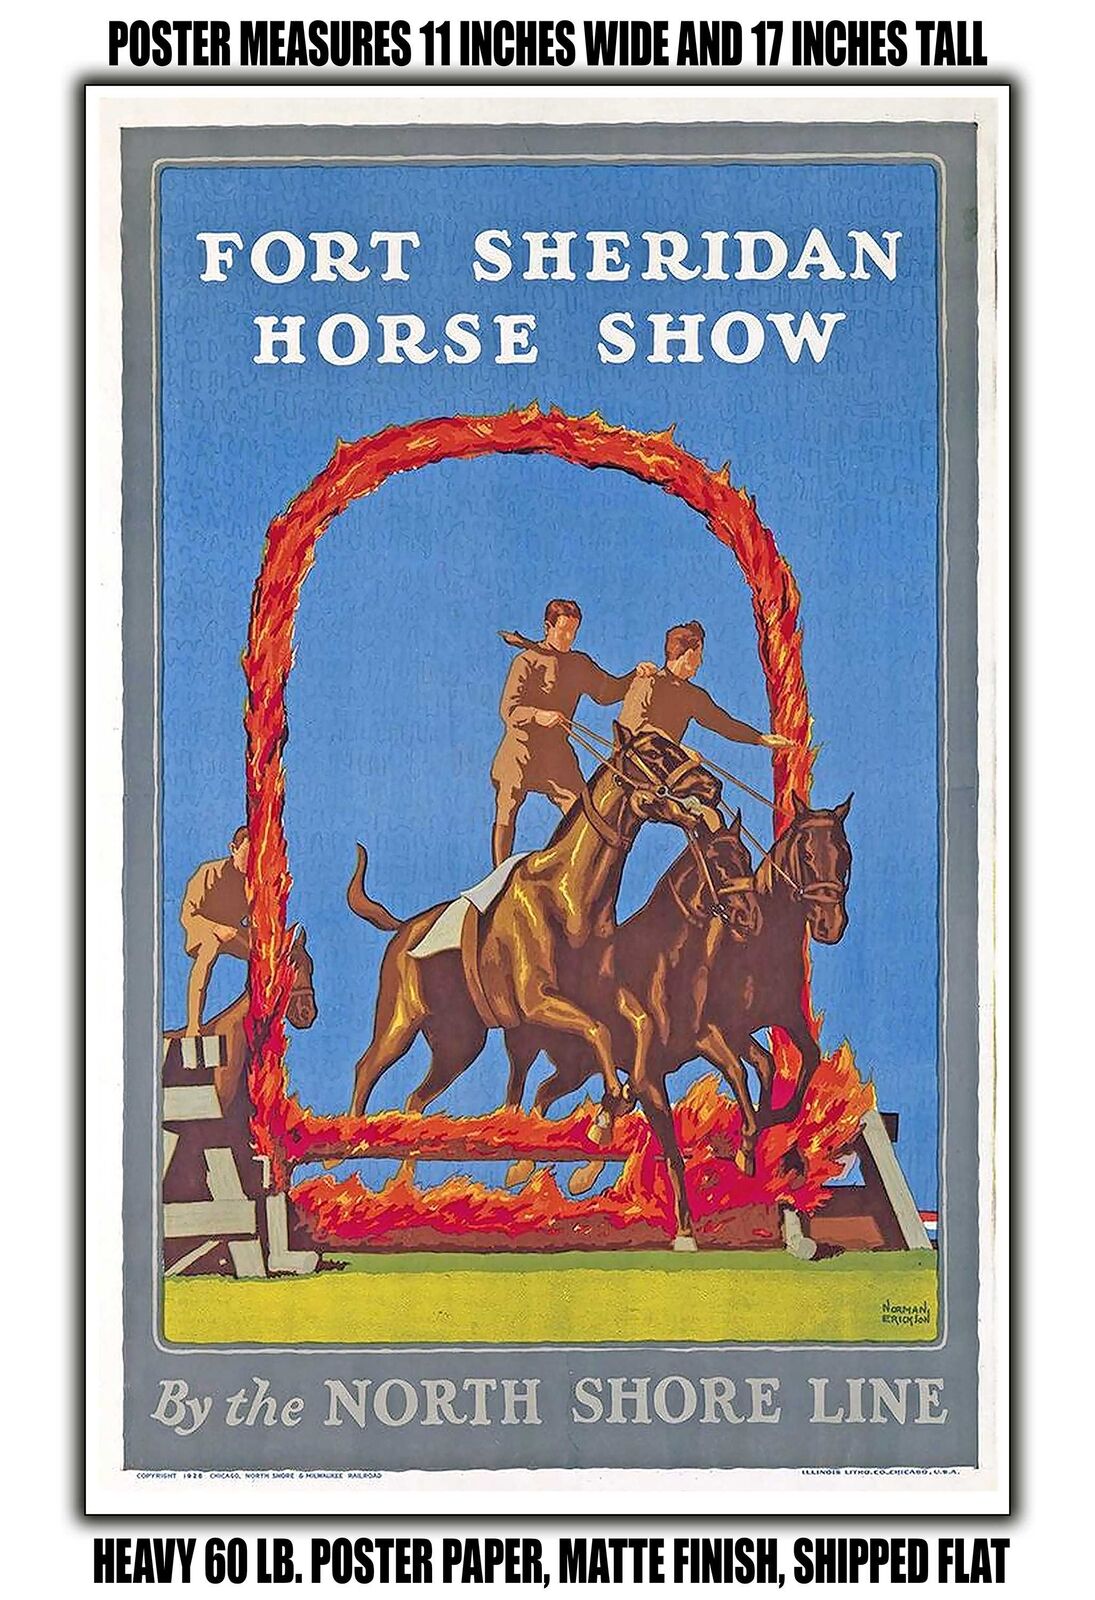 11x17 POSTER - 1926 Fort Sheridan Horse Show by the North Shore Line